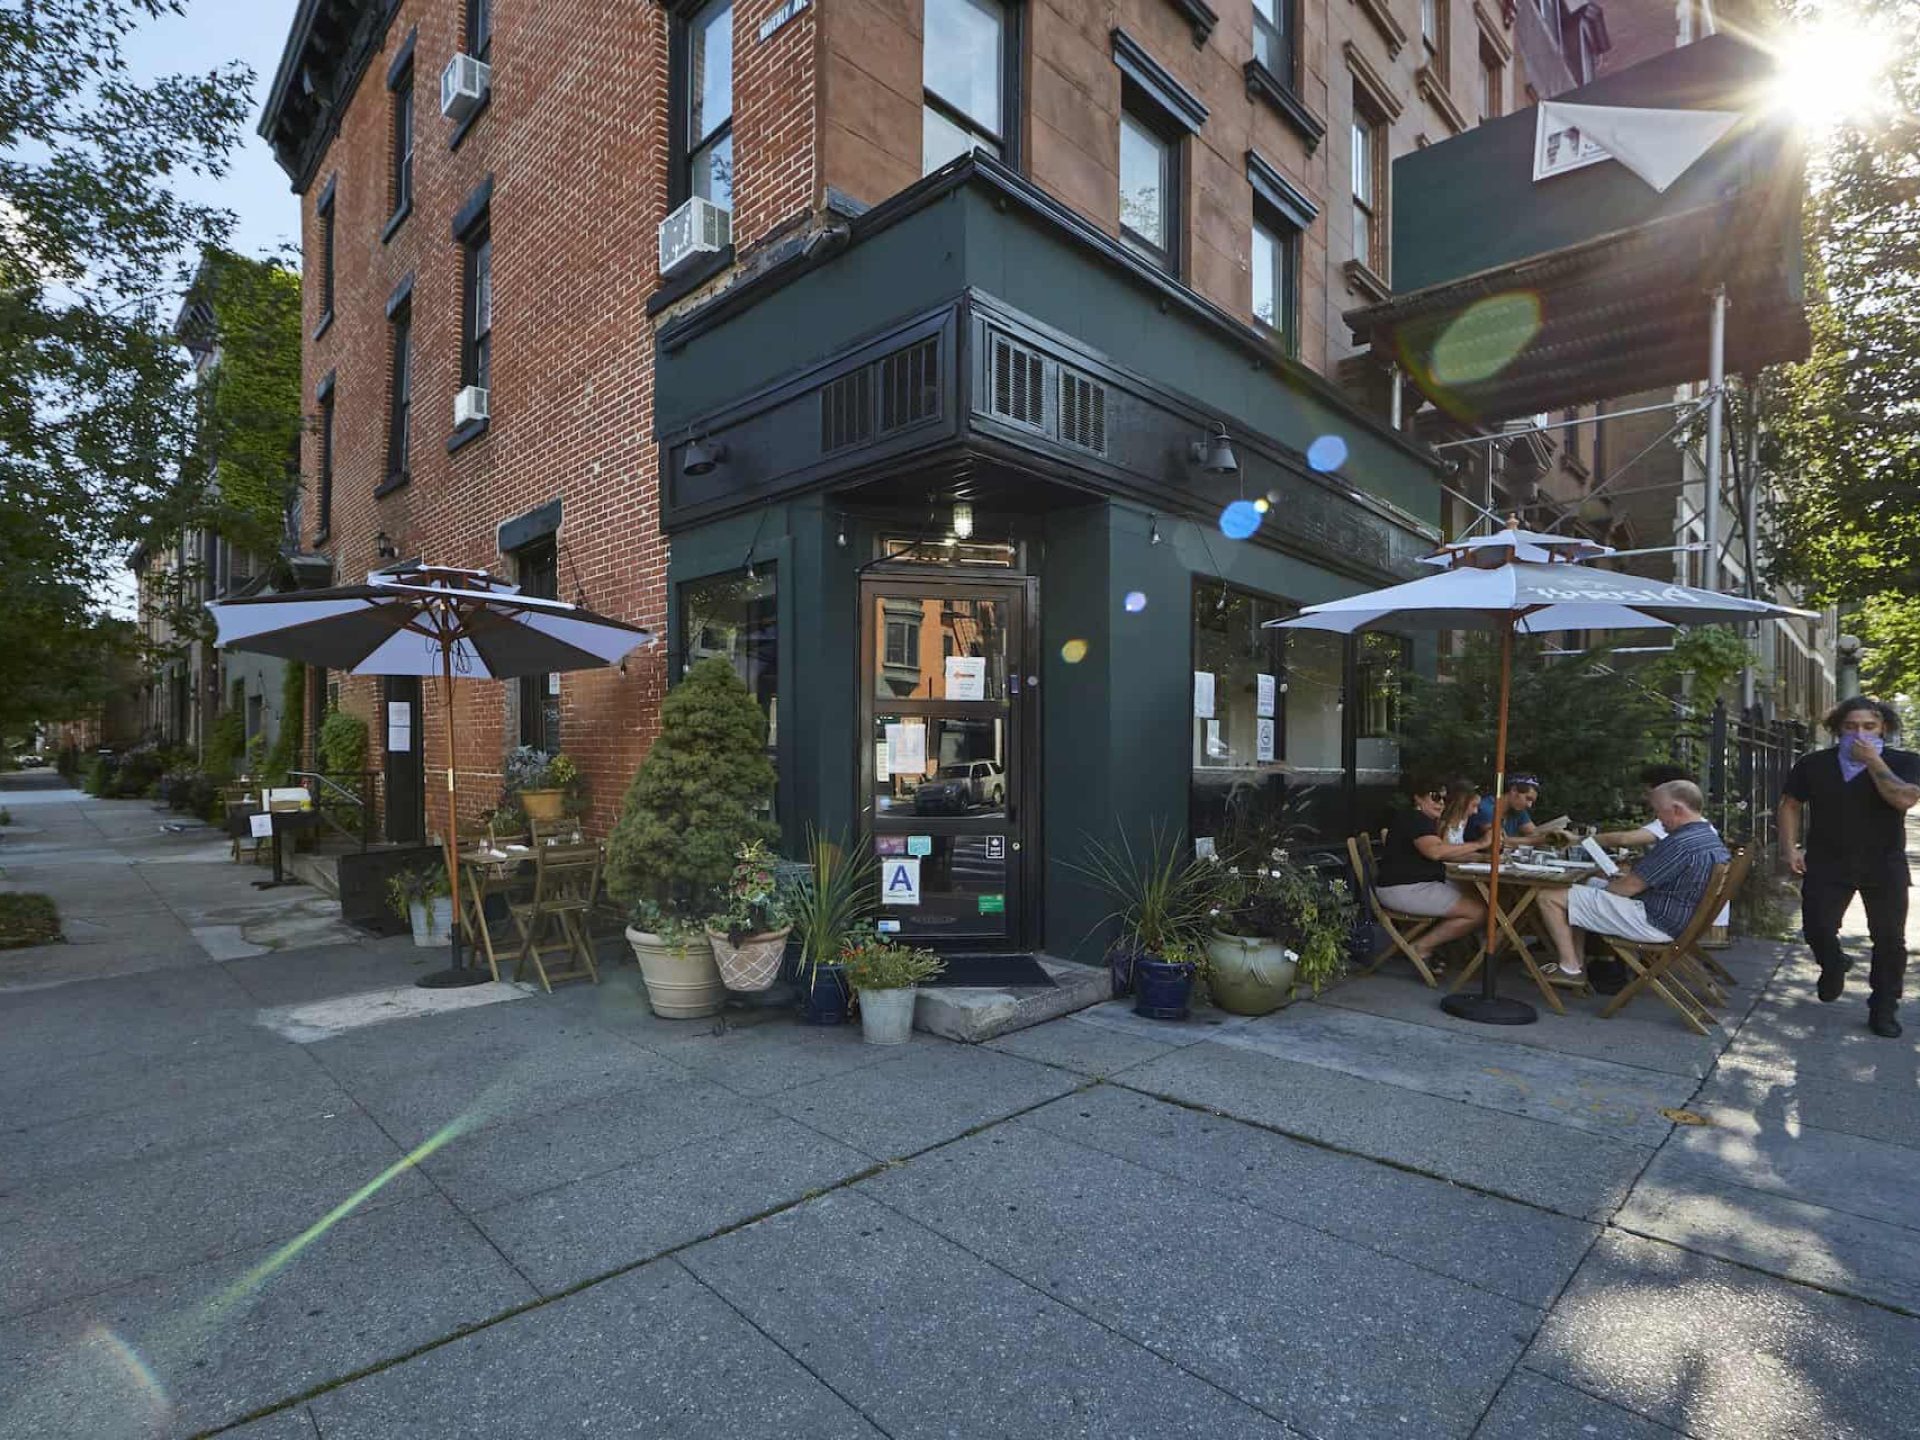 Restaurant entrance at the corner of a brick building with a green exterior and outdoor seating area with umbrellas.